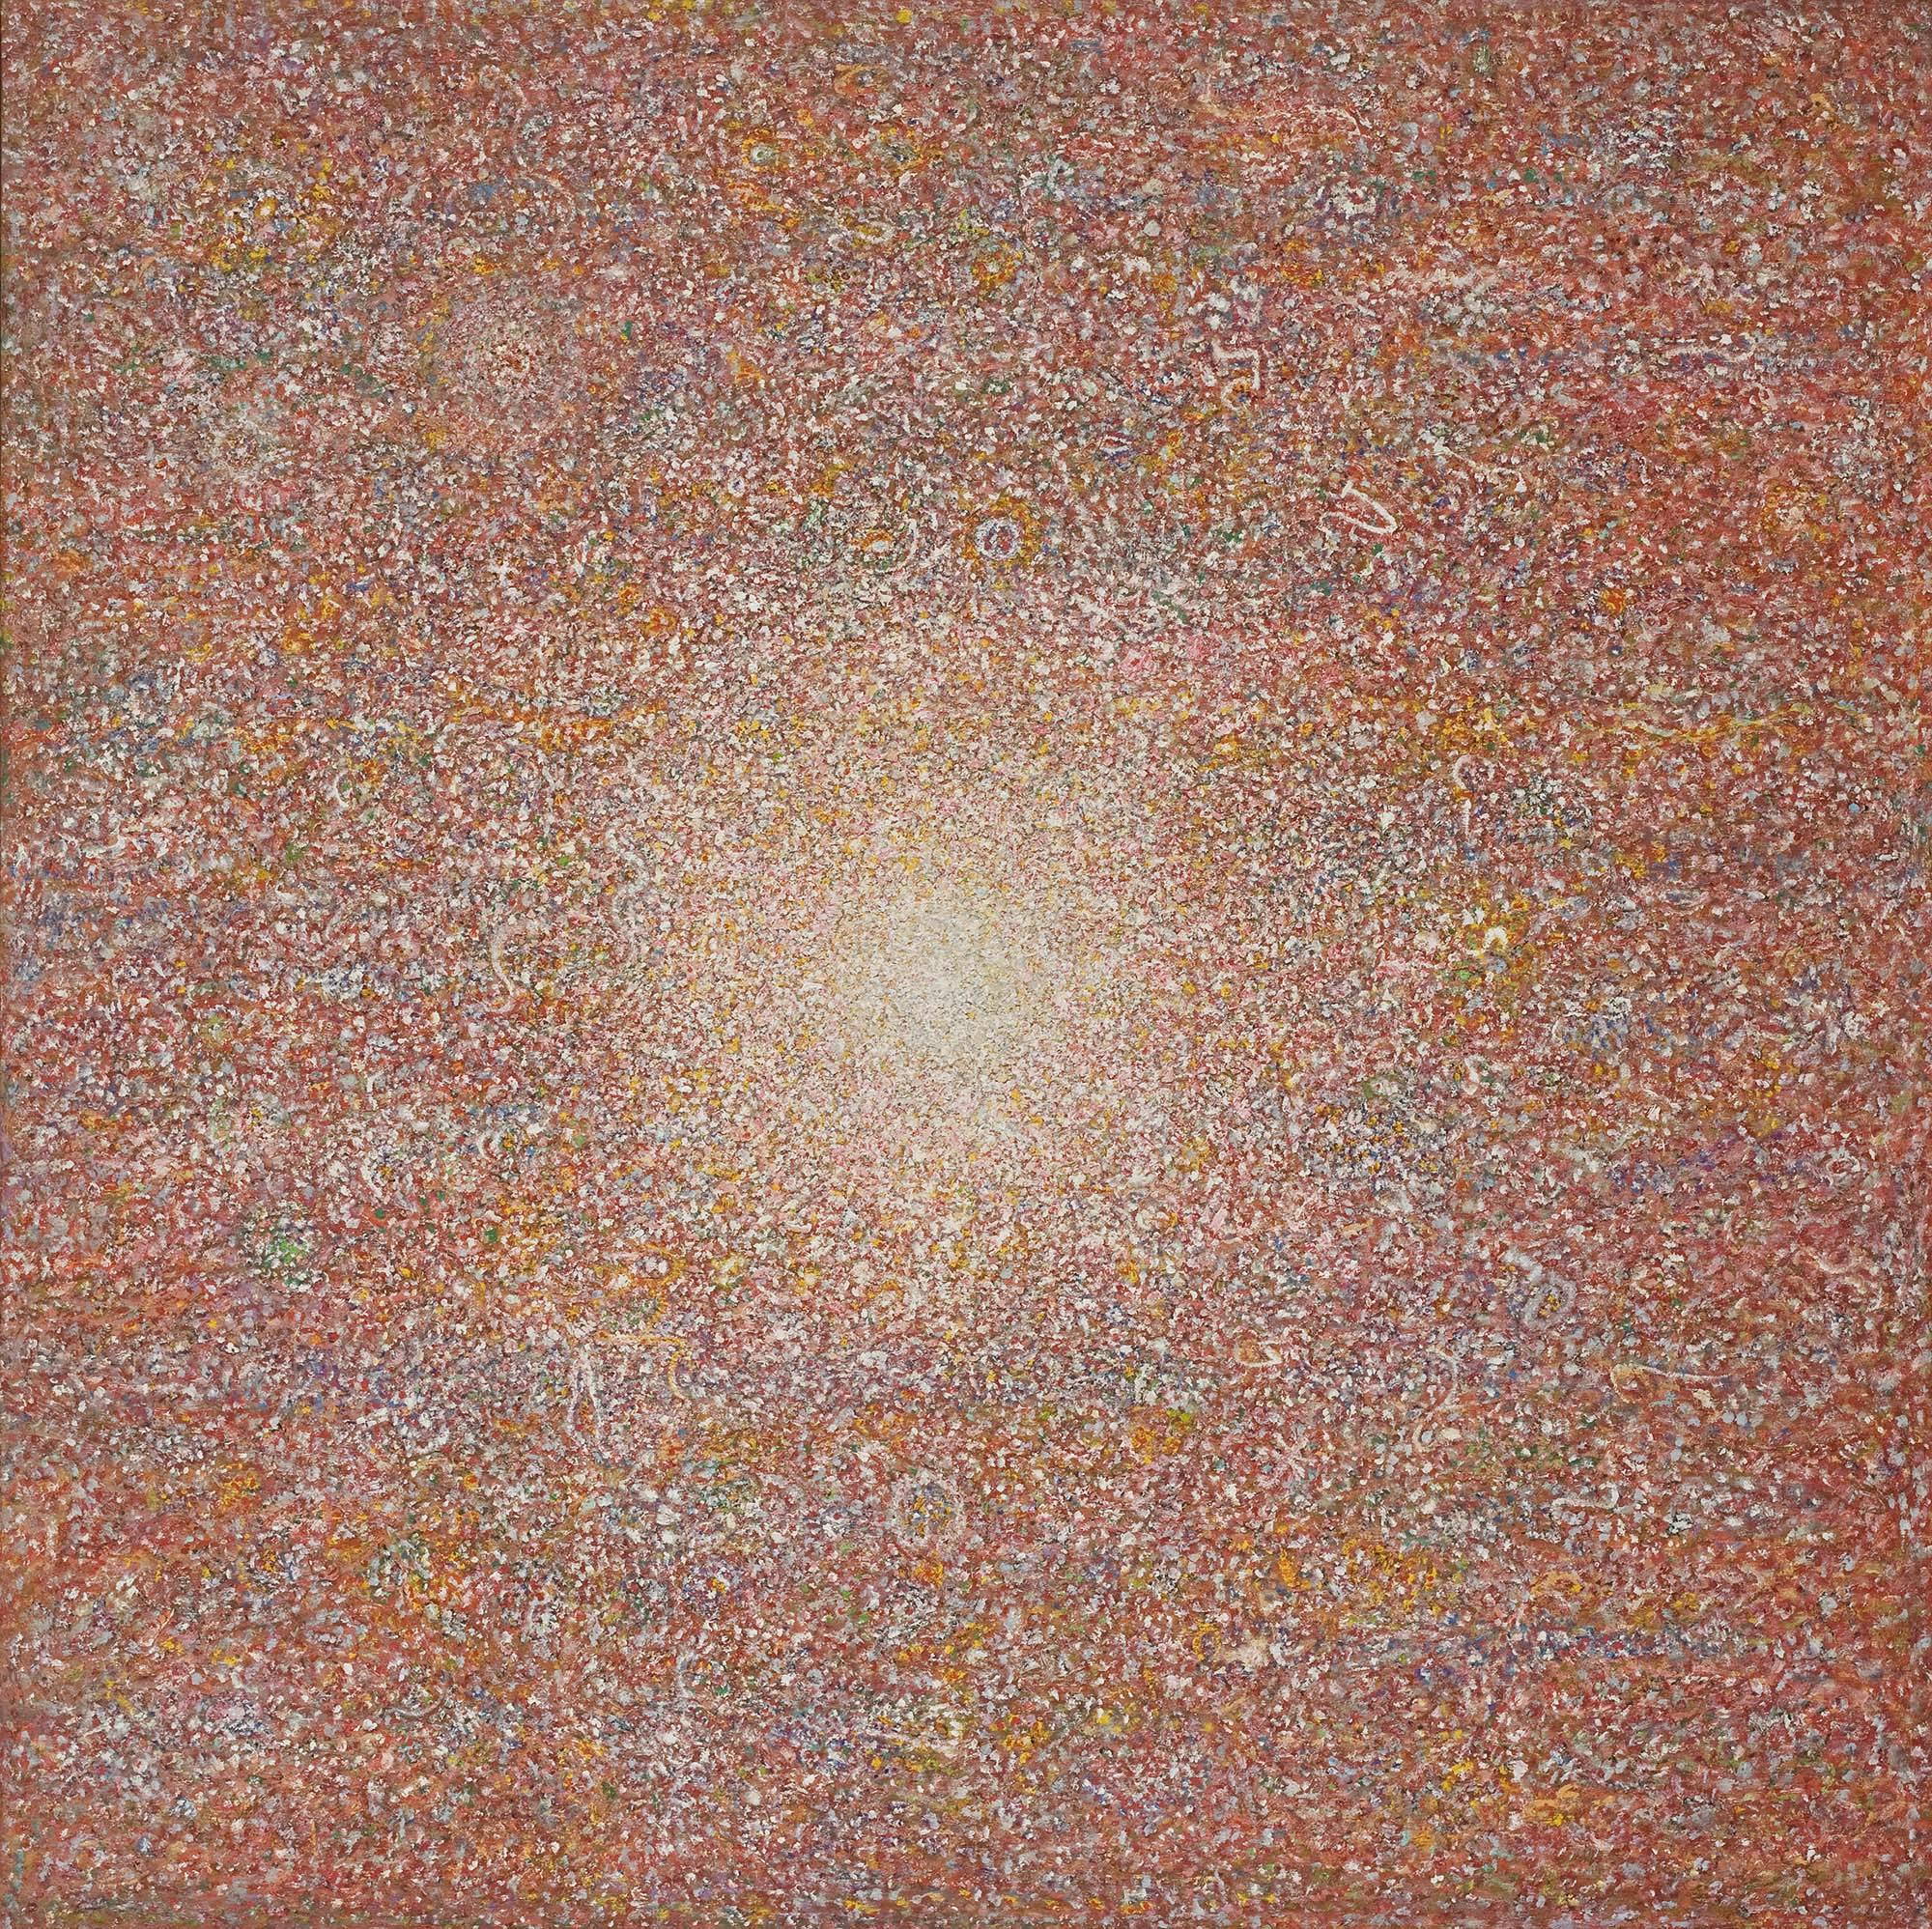 Transcendent Presence
1966–67
Oil on canvas
61 x 61 in. (154.9 x 154.9 cm)  
Grand Rapids Art Museum, Michigan, Gift of the Estate of Helen Burke (2005.2)
 – The Richard Pousette-Dart Foundation